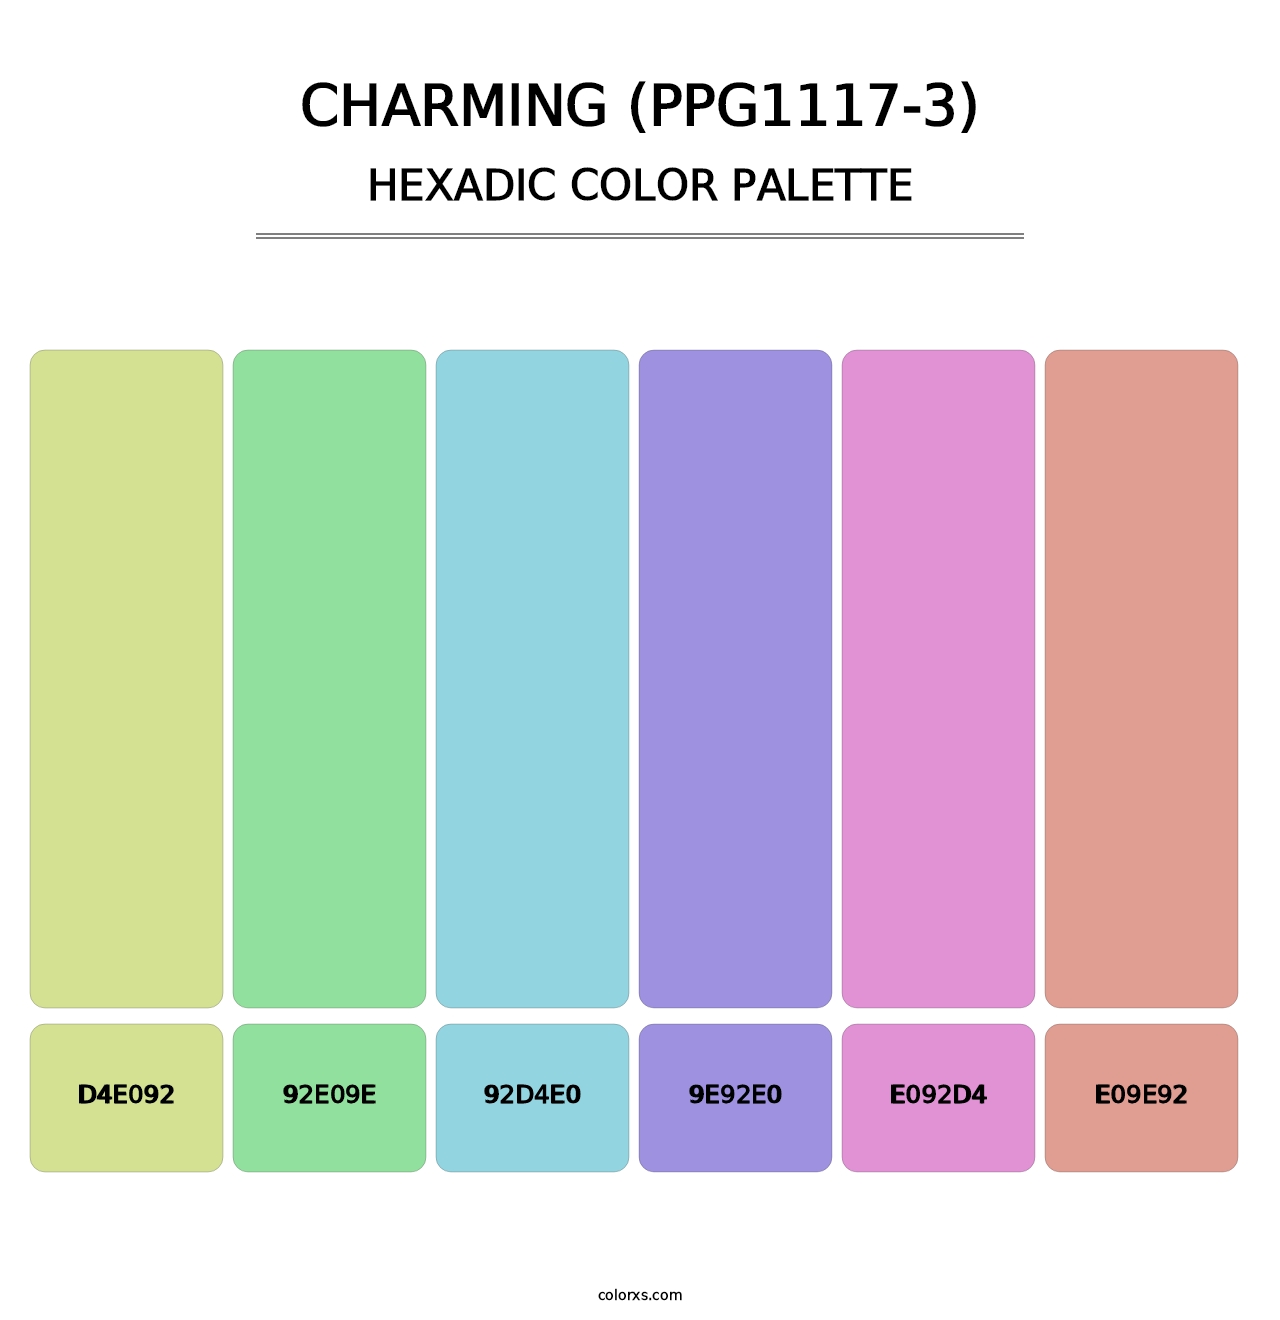 Charming (PPG1117-3) - Hexadic Color Palette